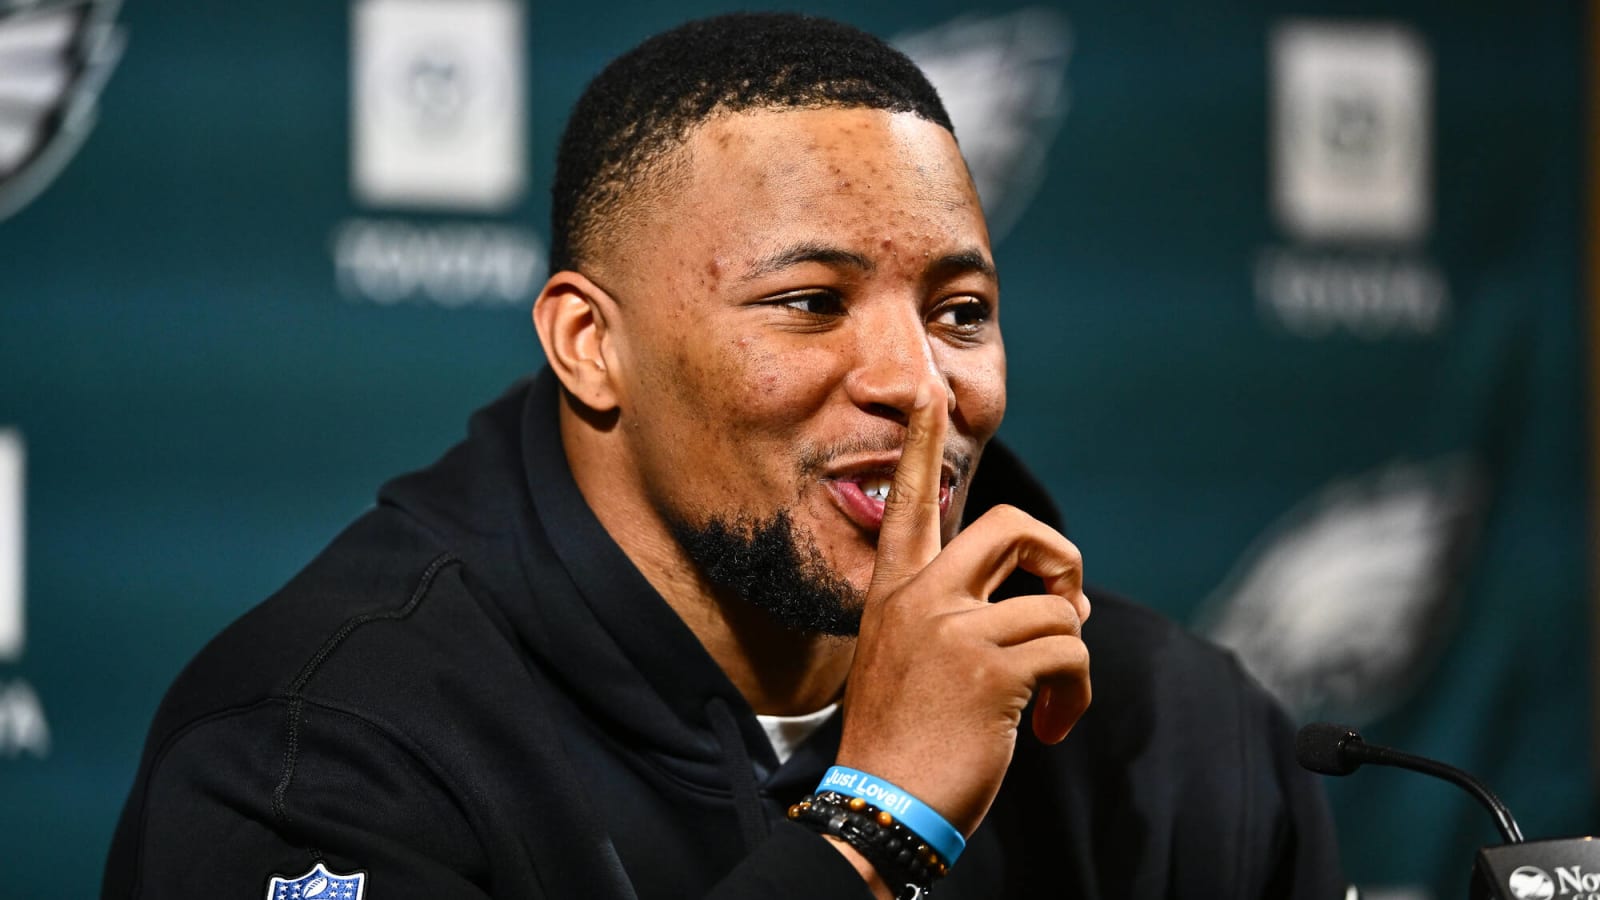 NFL analyst makes bold prediction for Eagles RB Saquon Barkley